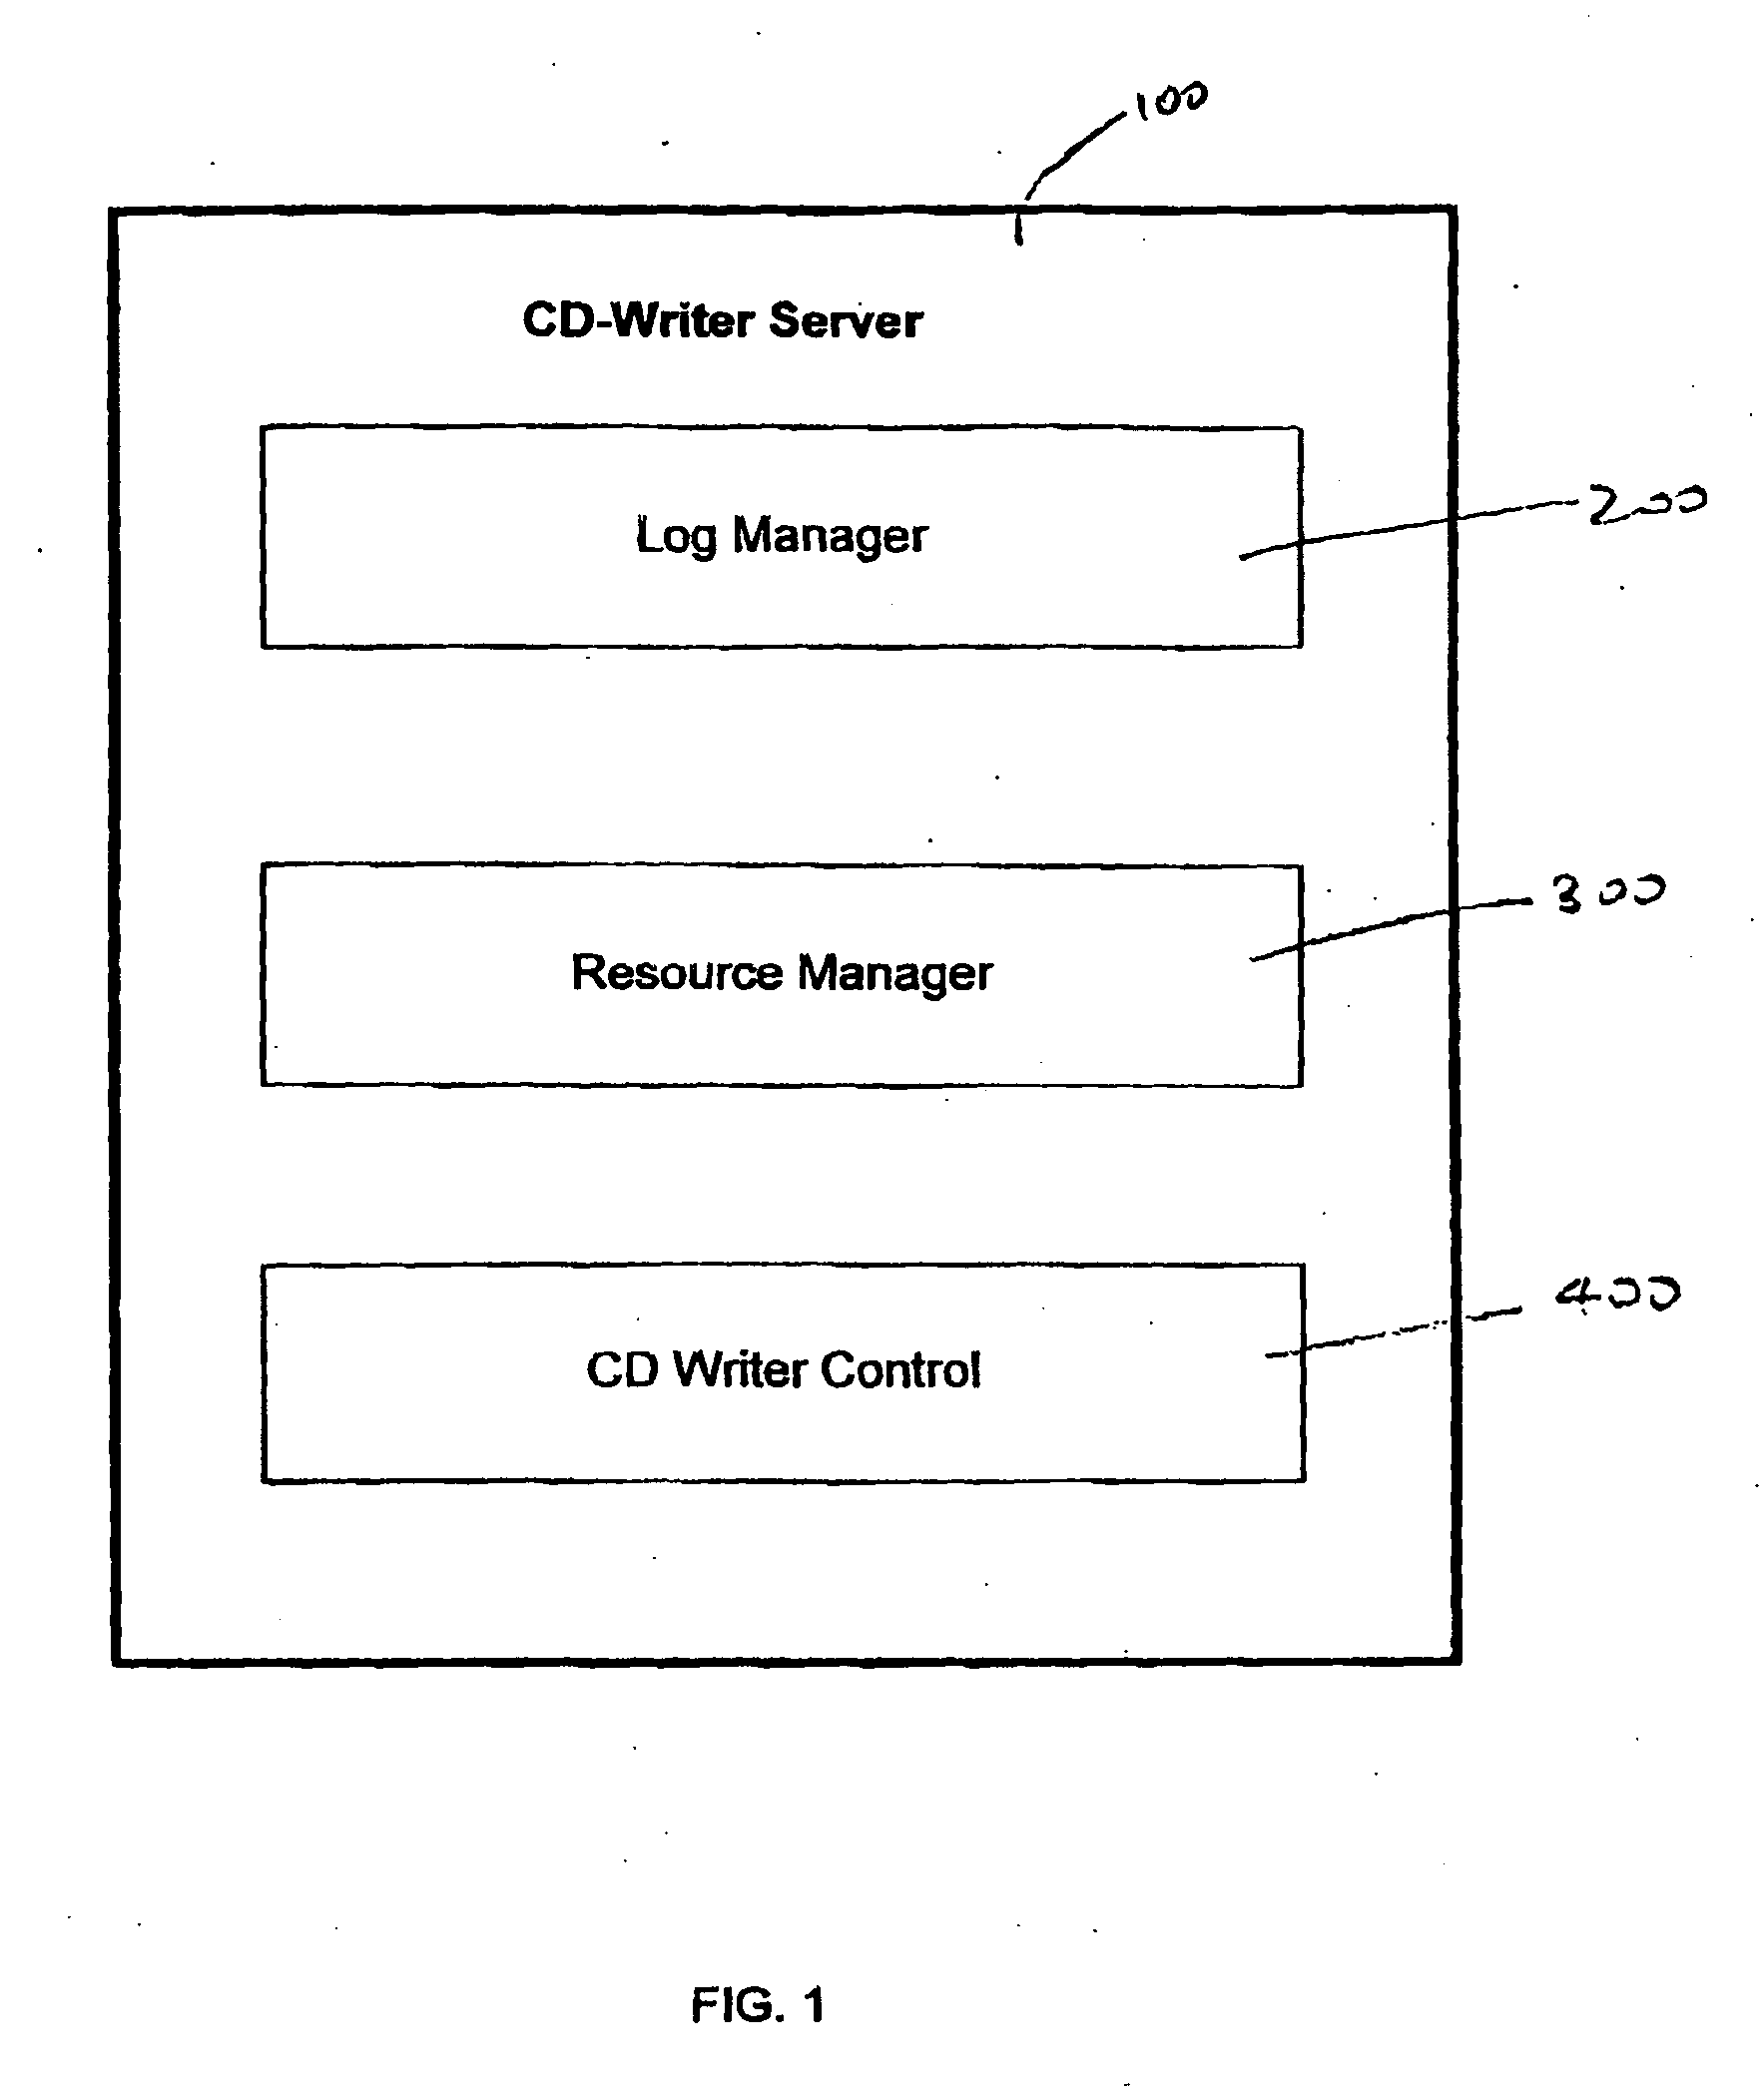 Method and system for supplying products from pre-stored digital data in response to demands transmitted via computer network